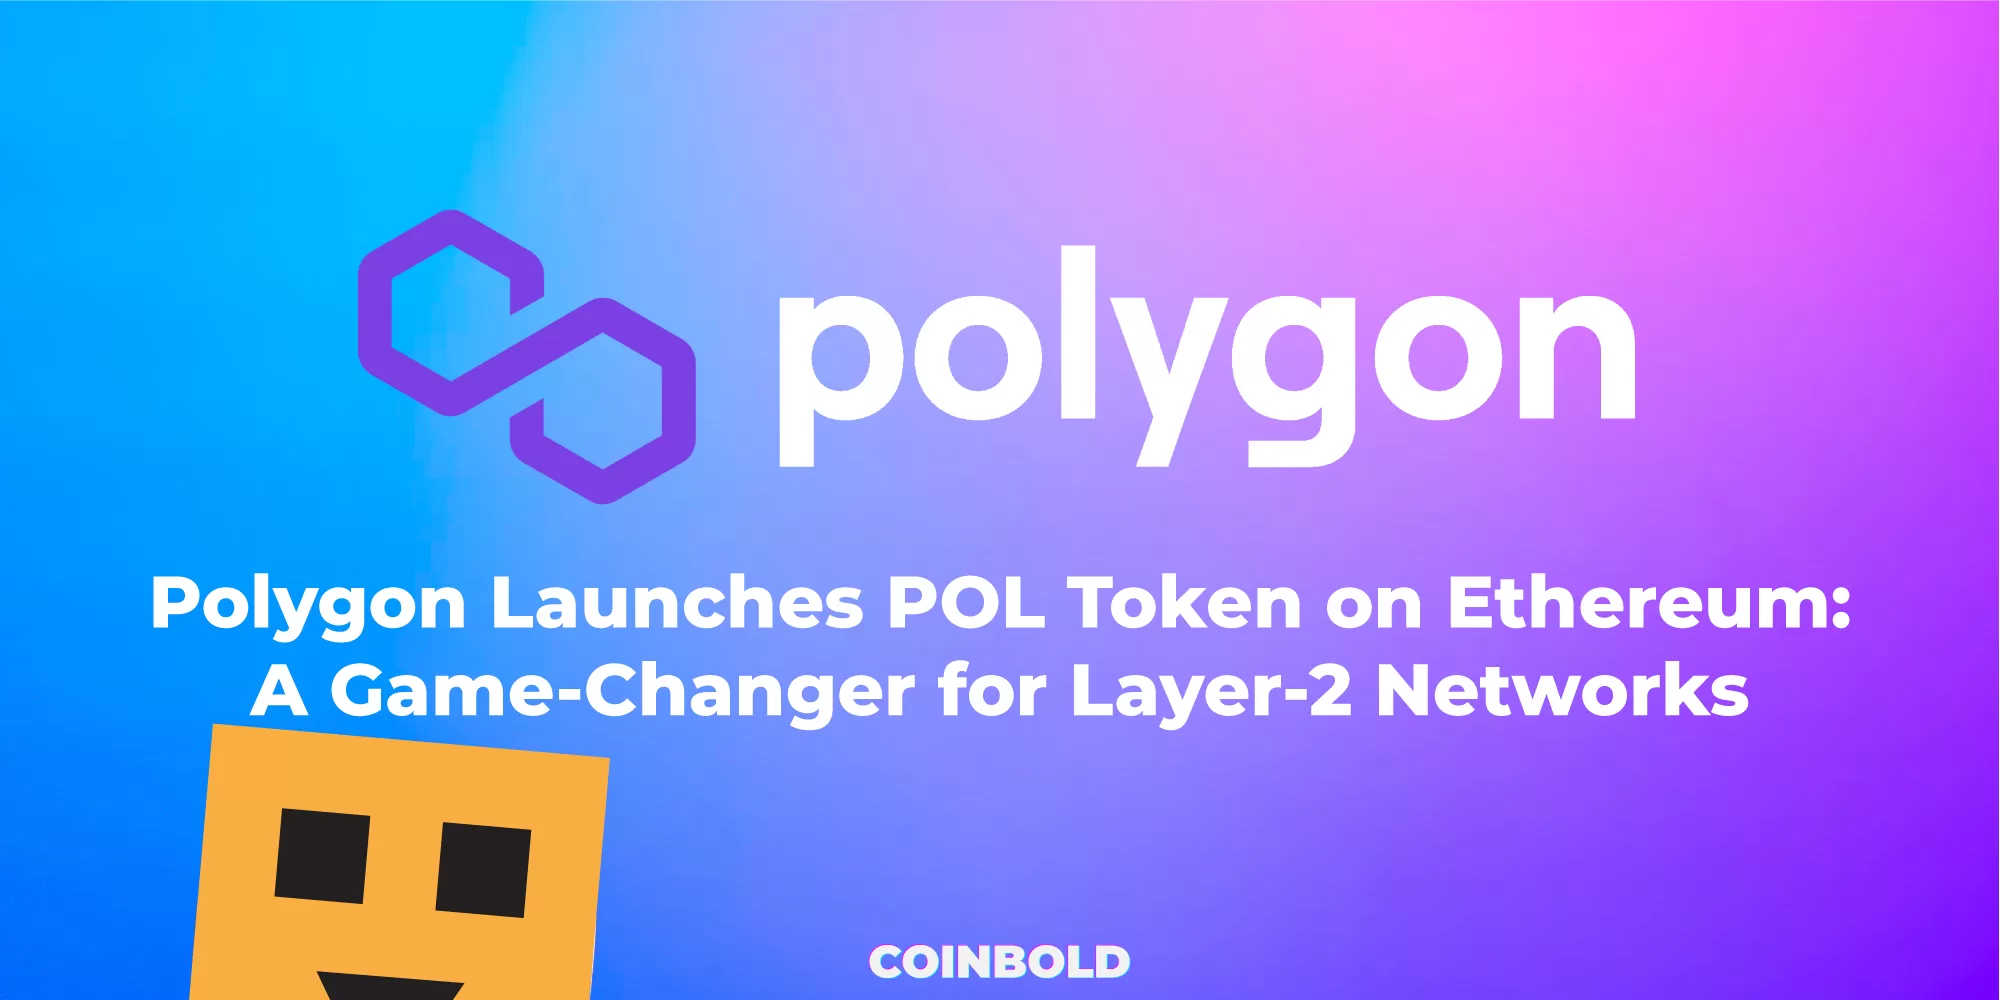 Polygon Launches POL Token on Ethereum A Game Changer for Layer 2 Networks